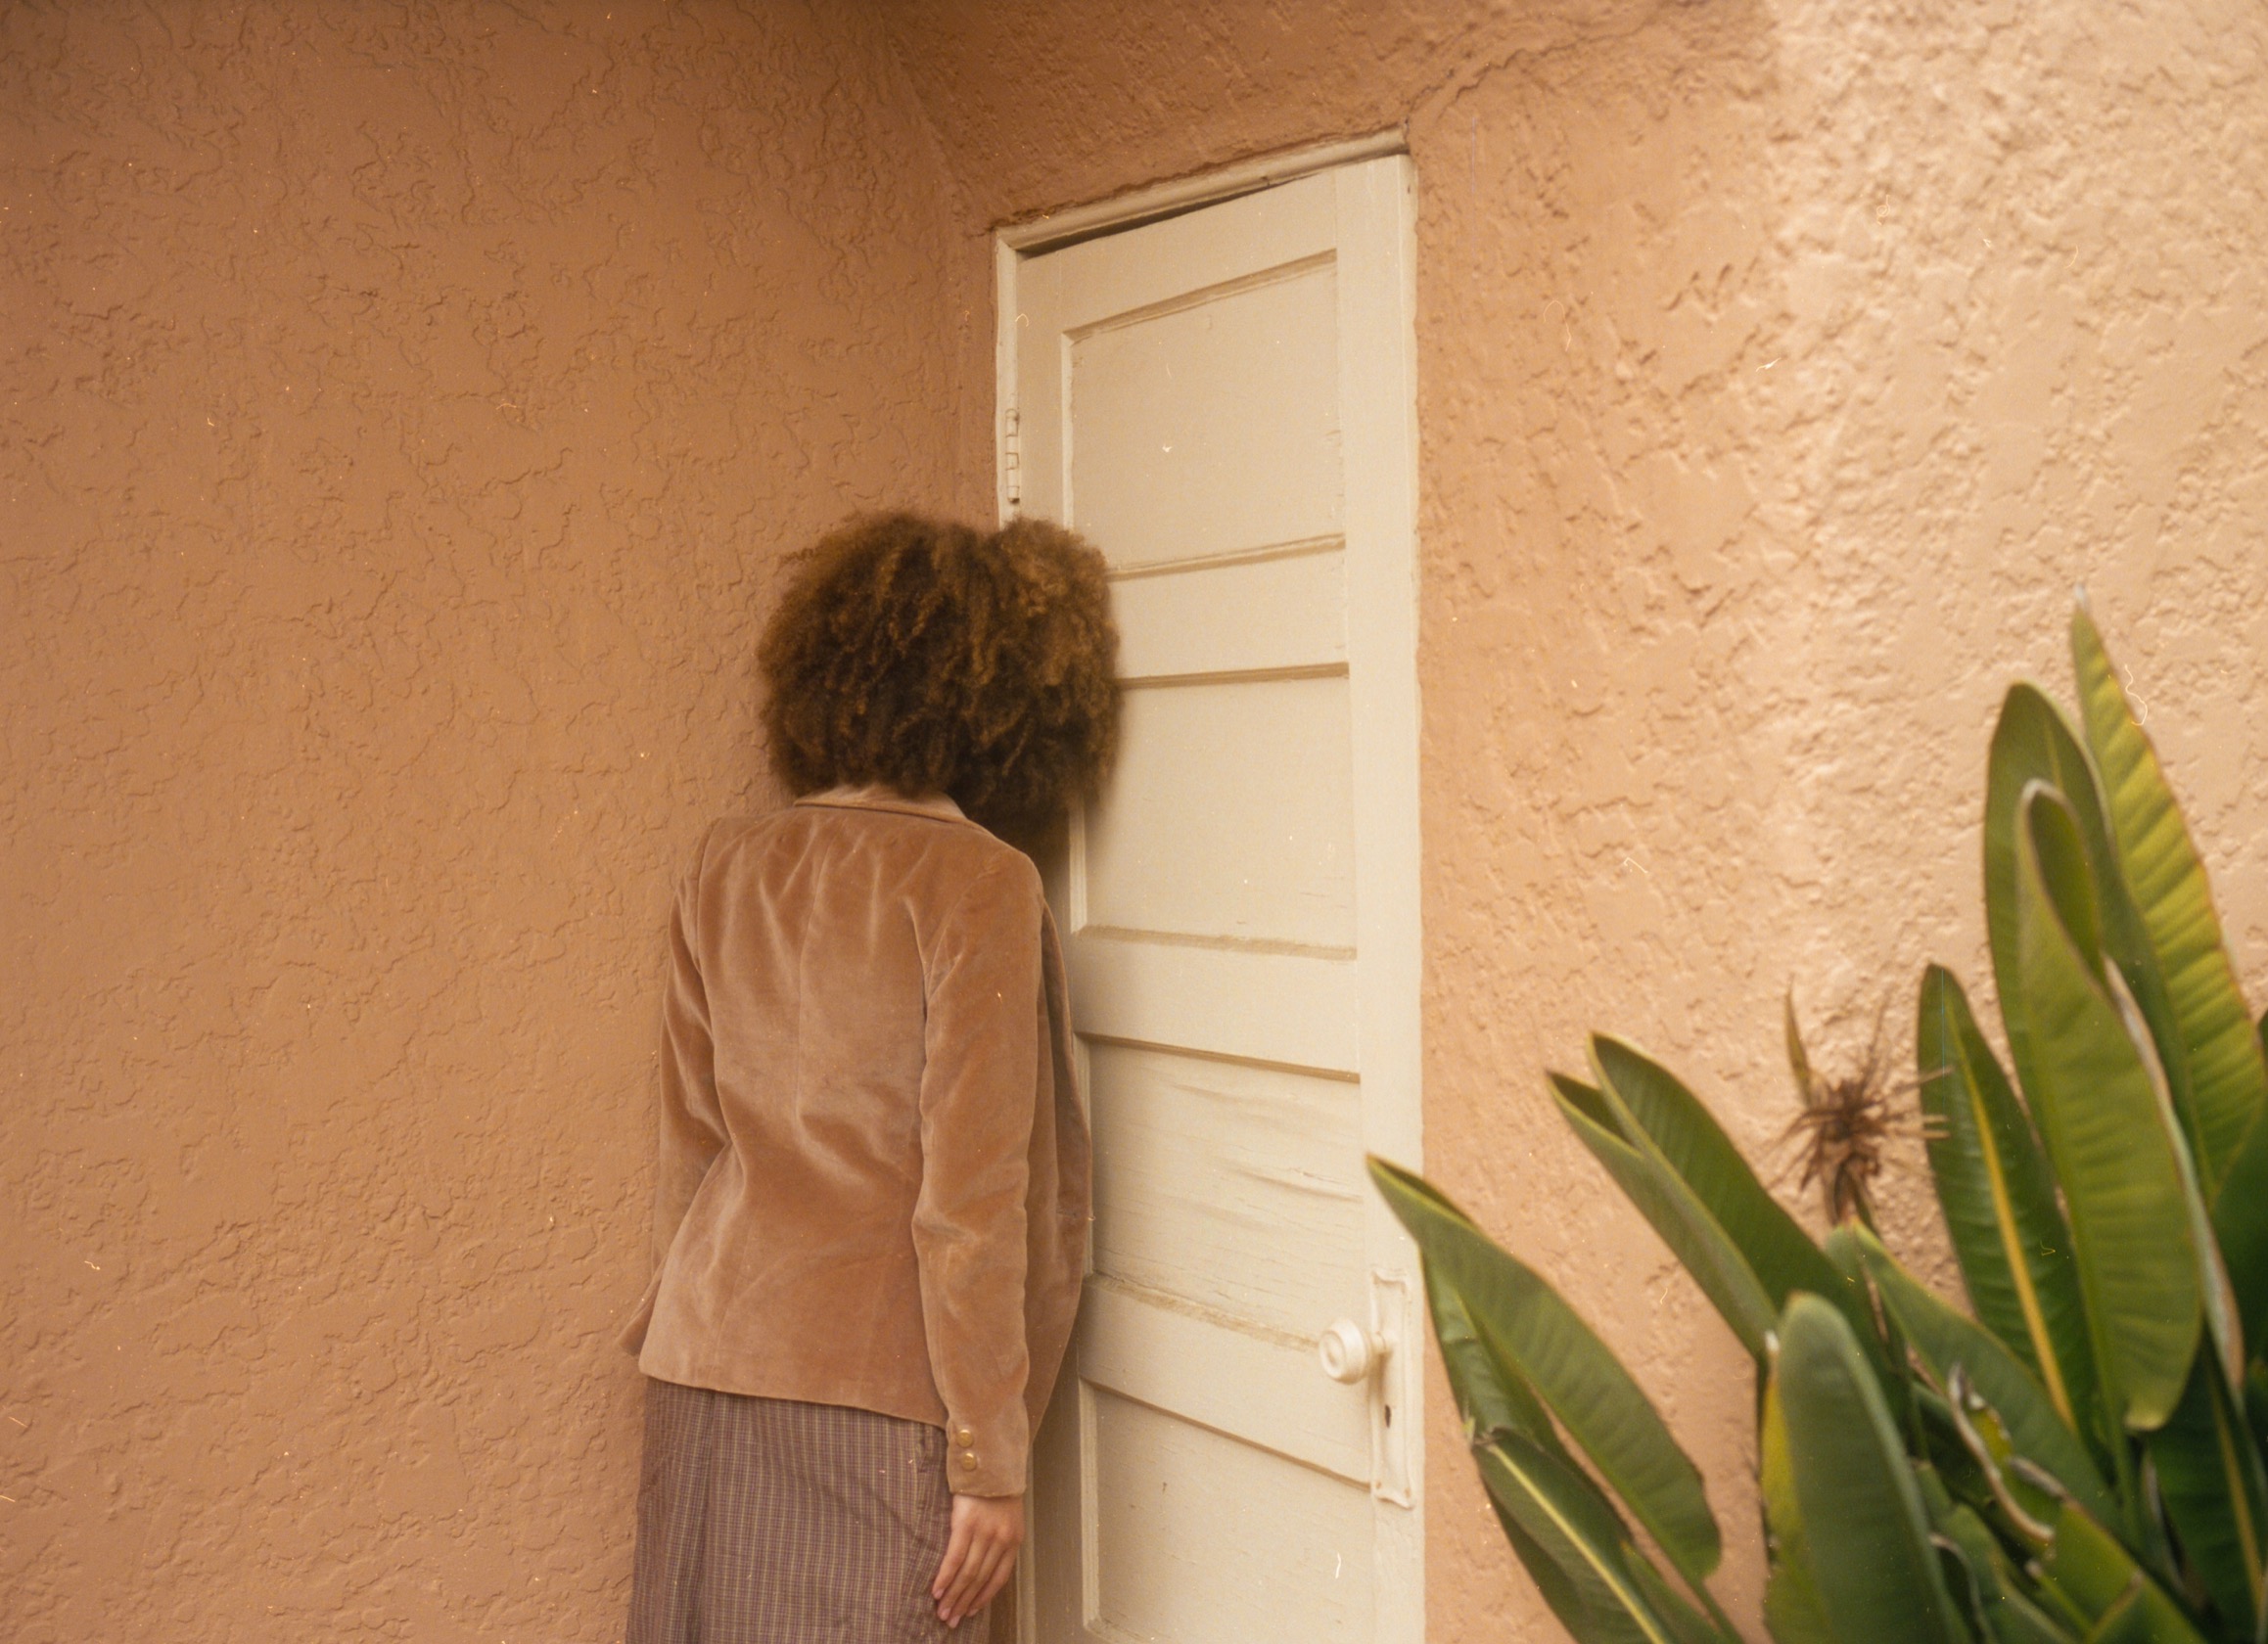 A person facing away from the camera leaning their head against a door in frustration or sadness.